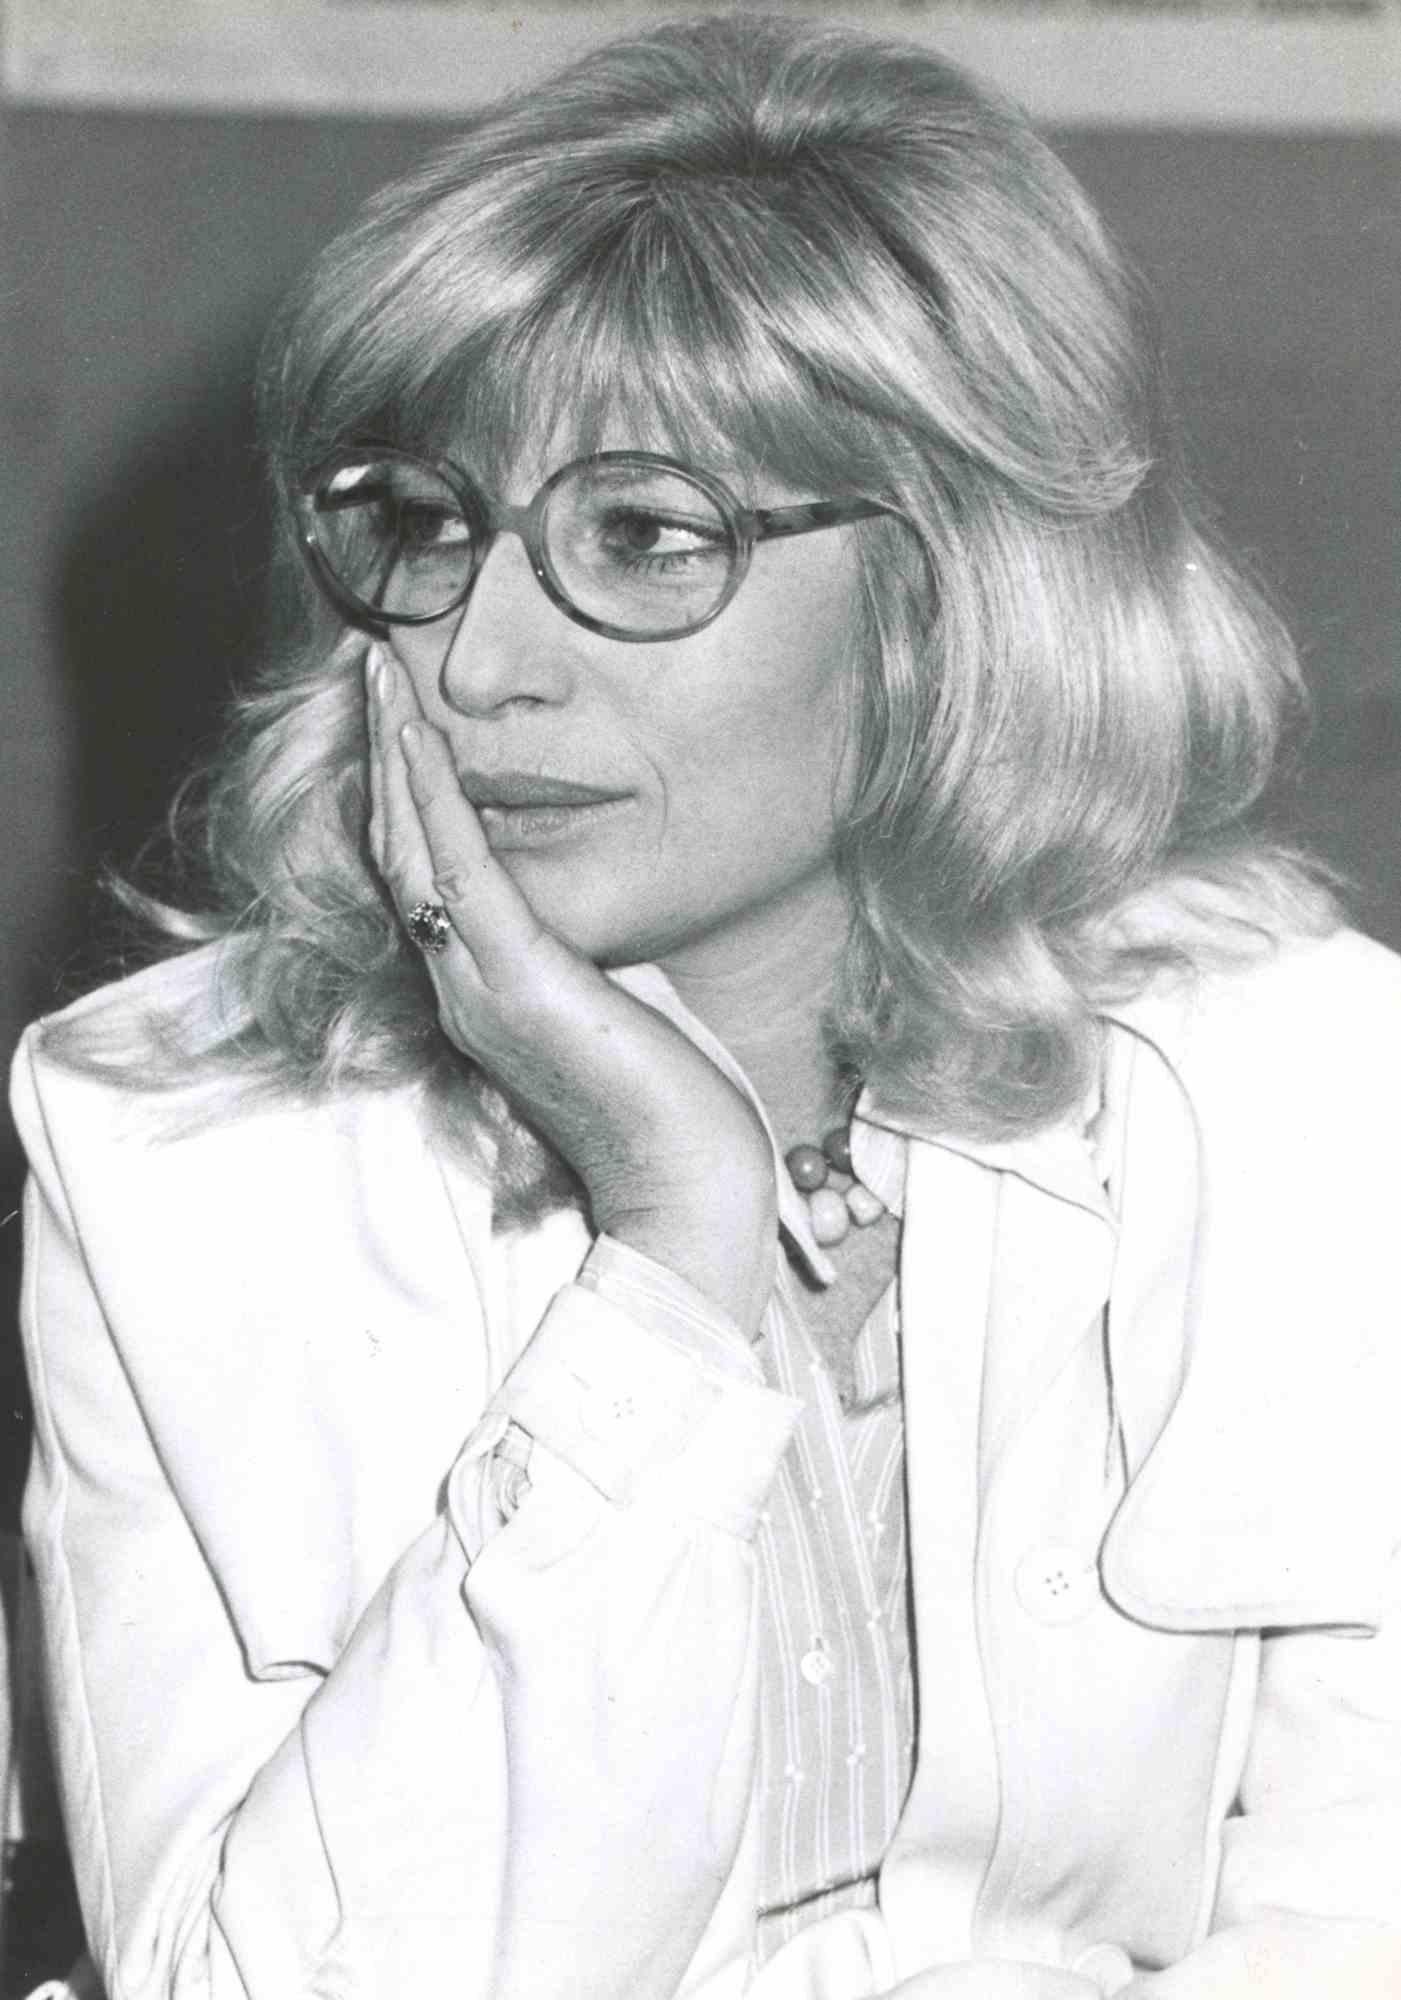 Unknown Black and White Photograph - Portrait of Monica Vitti - Vintage Black and White Photo - 1980s